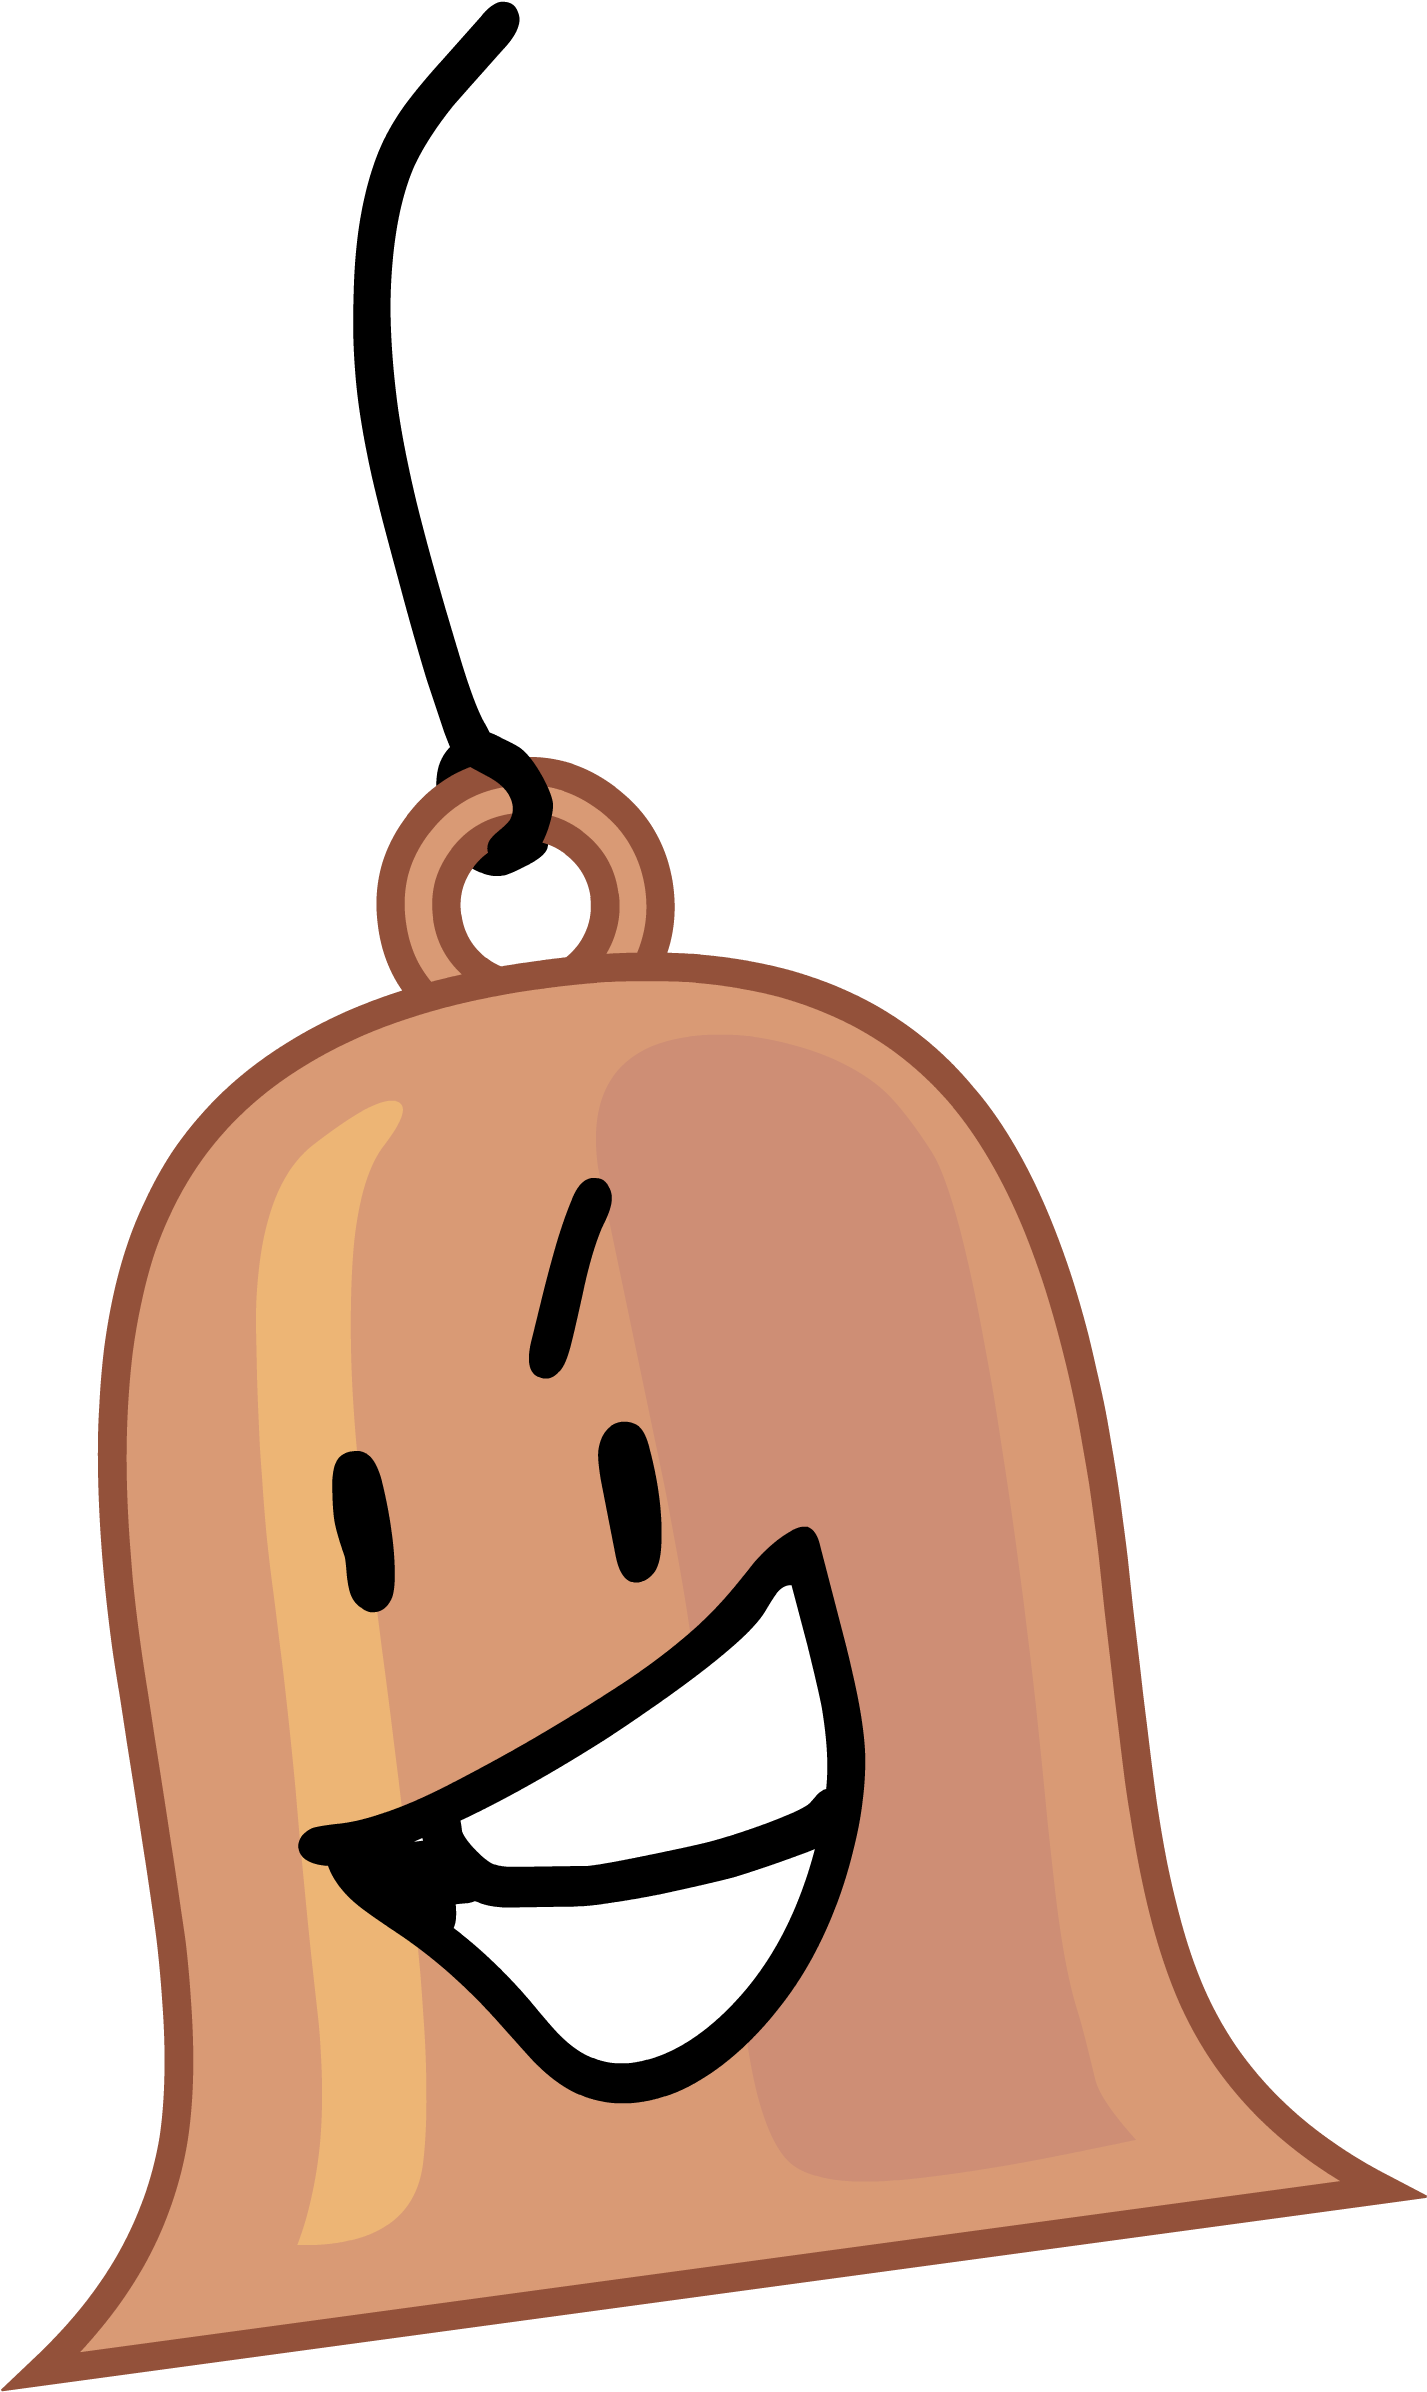 Bell Win - Bfdi 6 Bell (1473x2484)